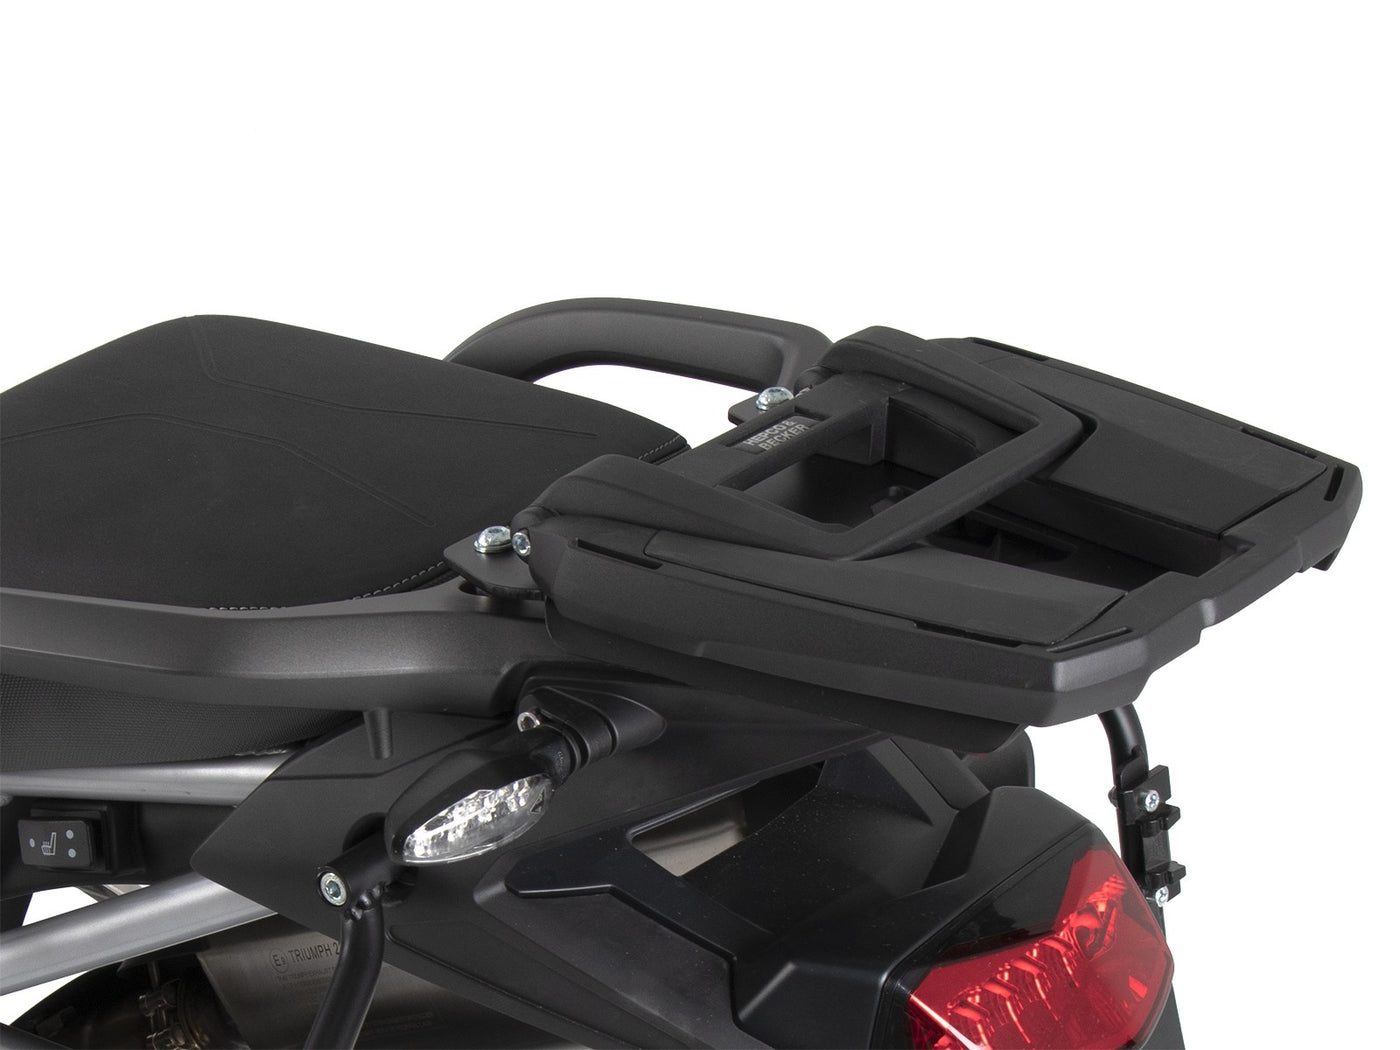 Easyrack Topcase Carrier for TRIUMPH Tiger 900 Rally / GT / Pro, 850 Sport, 1200 Models